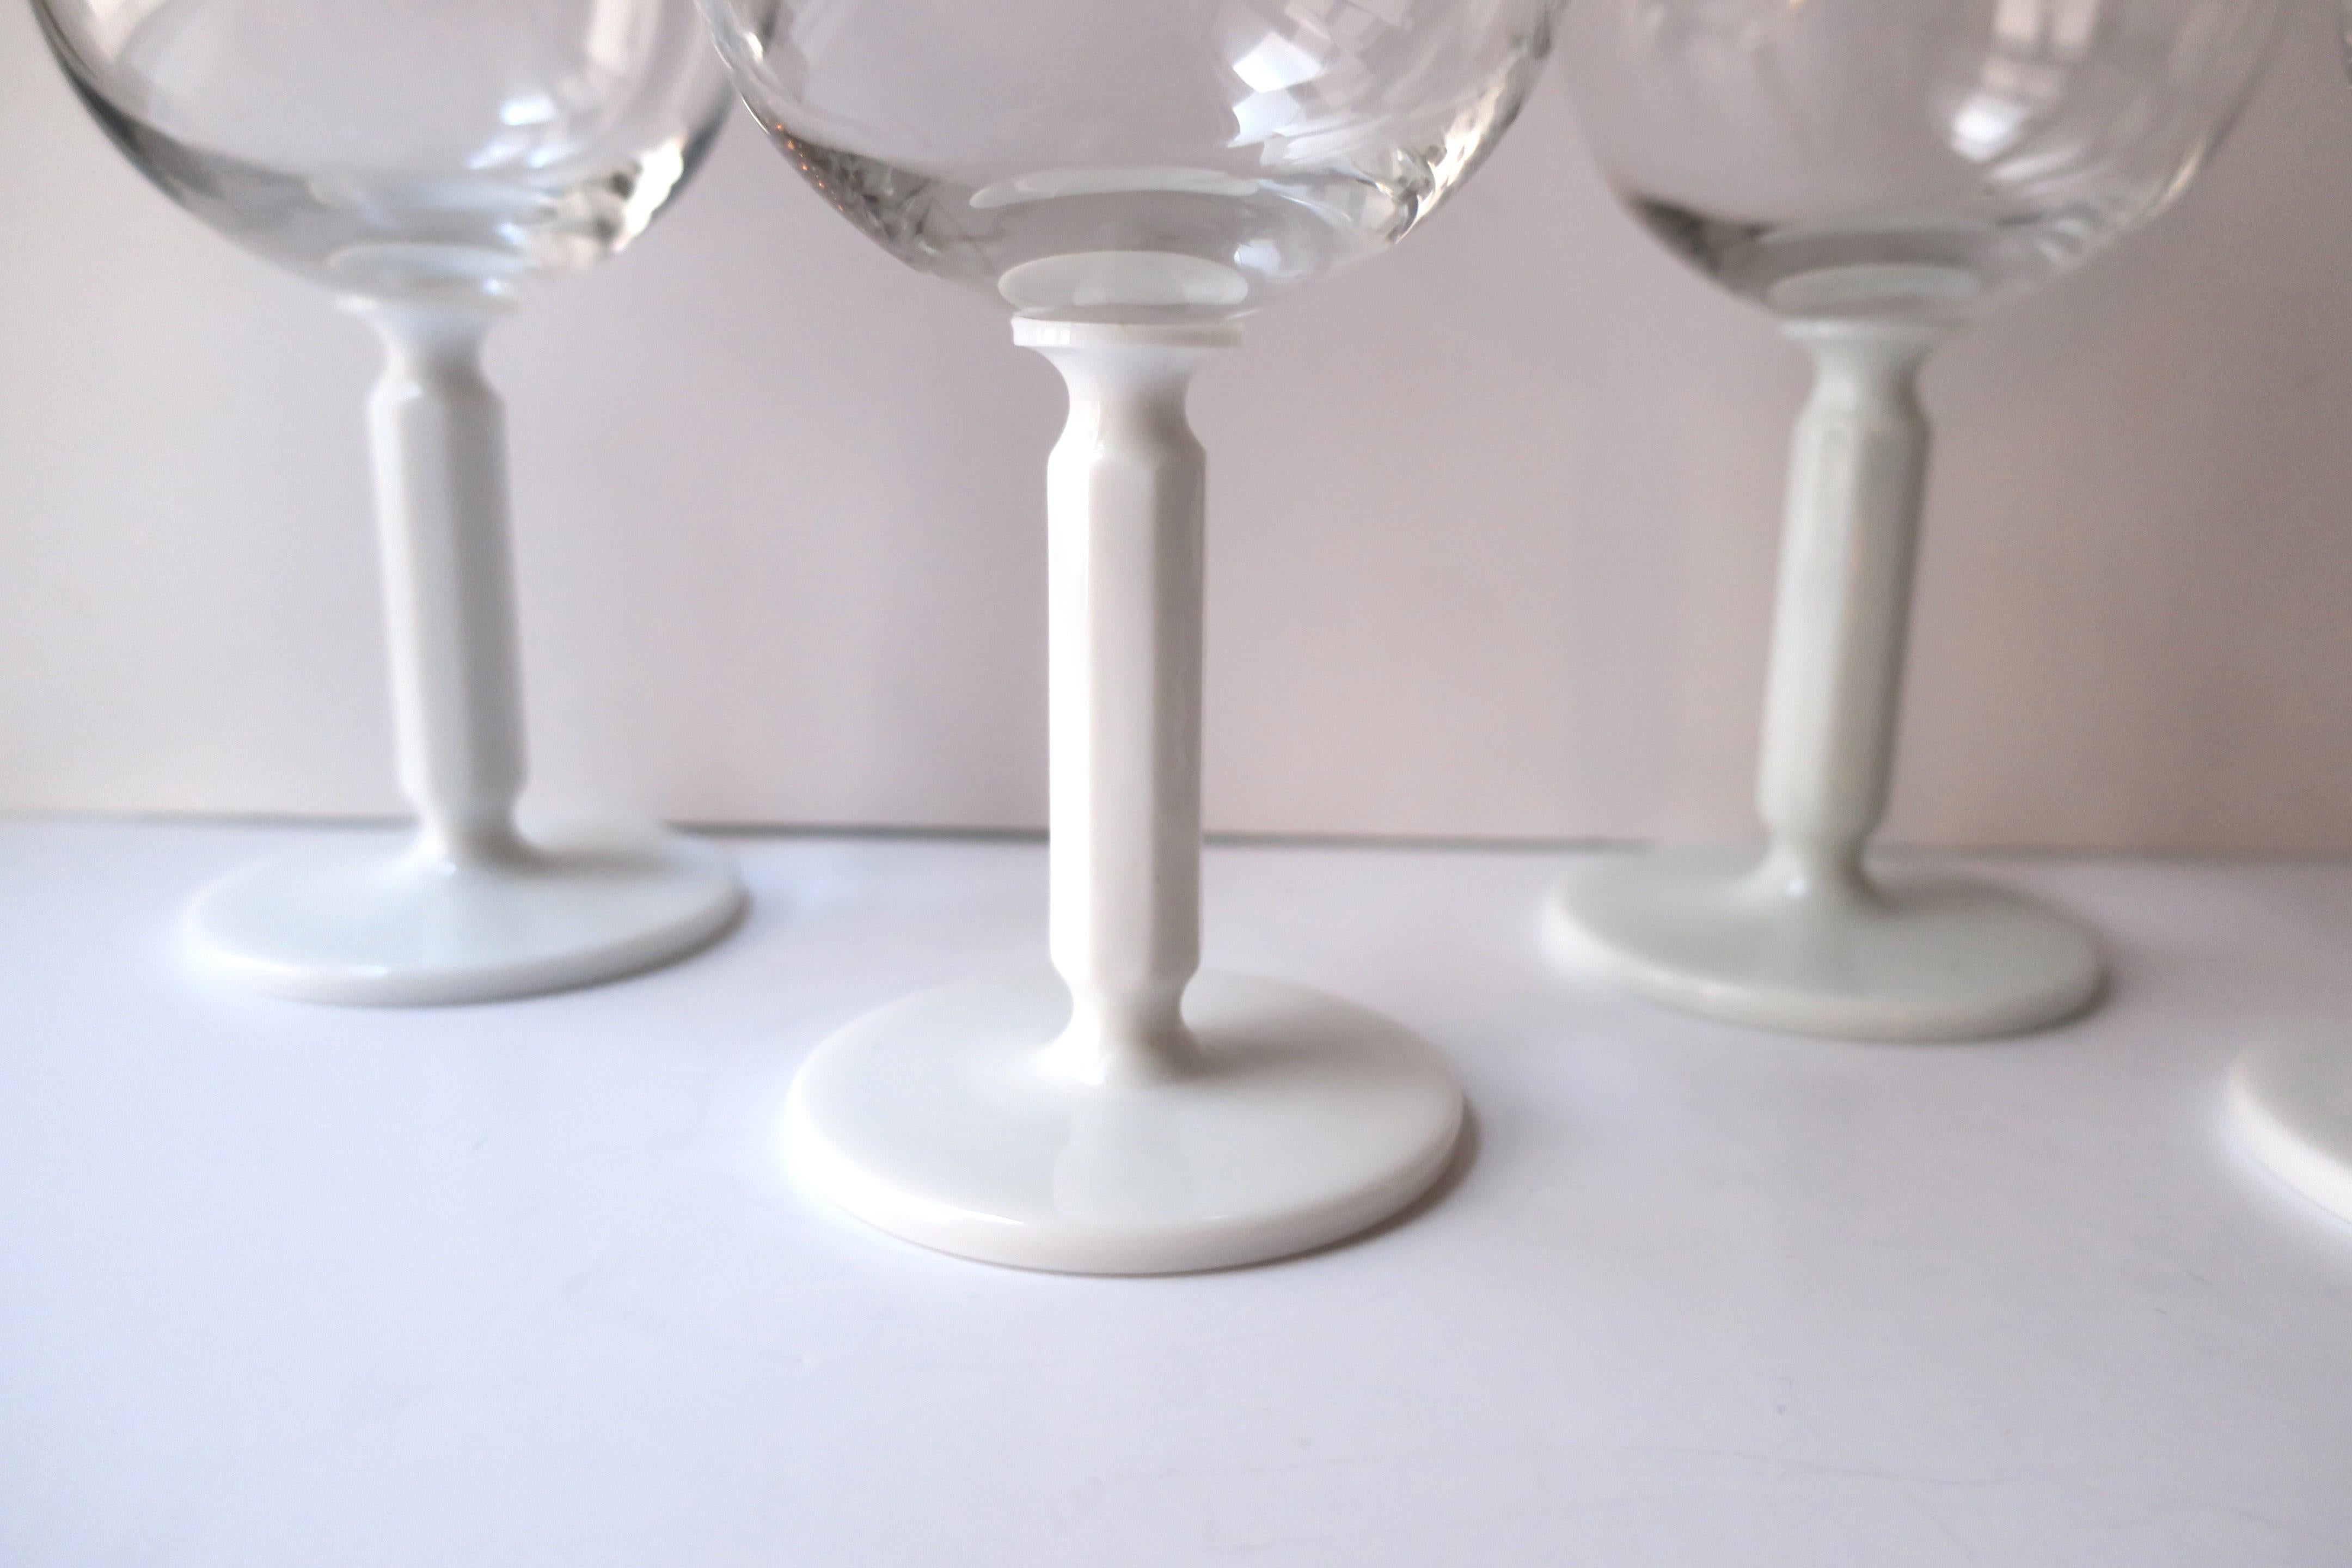 Rosenthal Studio-Line Wine or Cocktail Glasses with White Glass Stem, Set of 4 For Sale 3